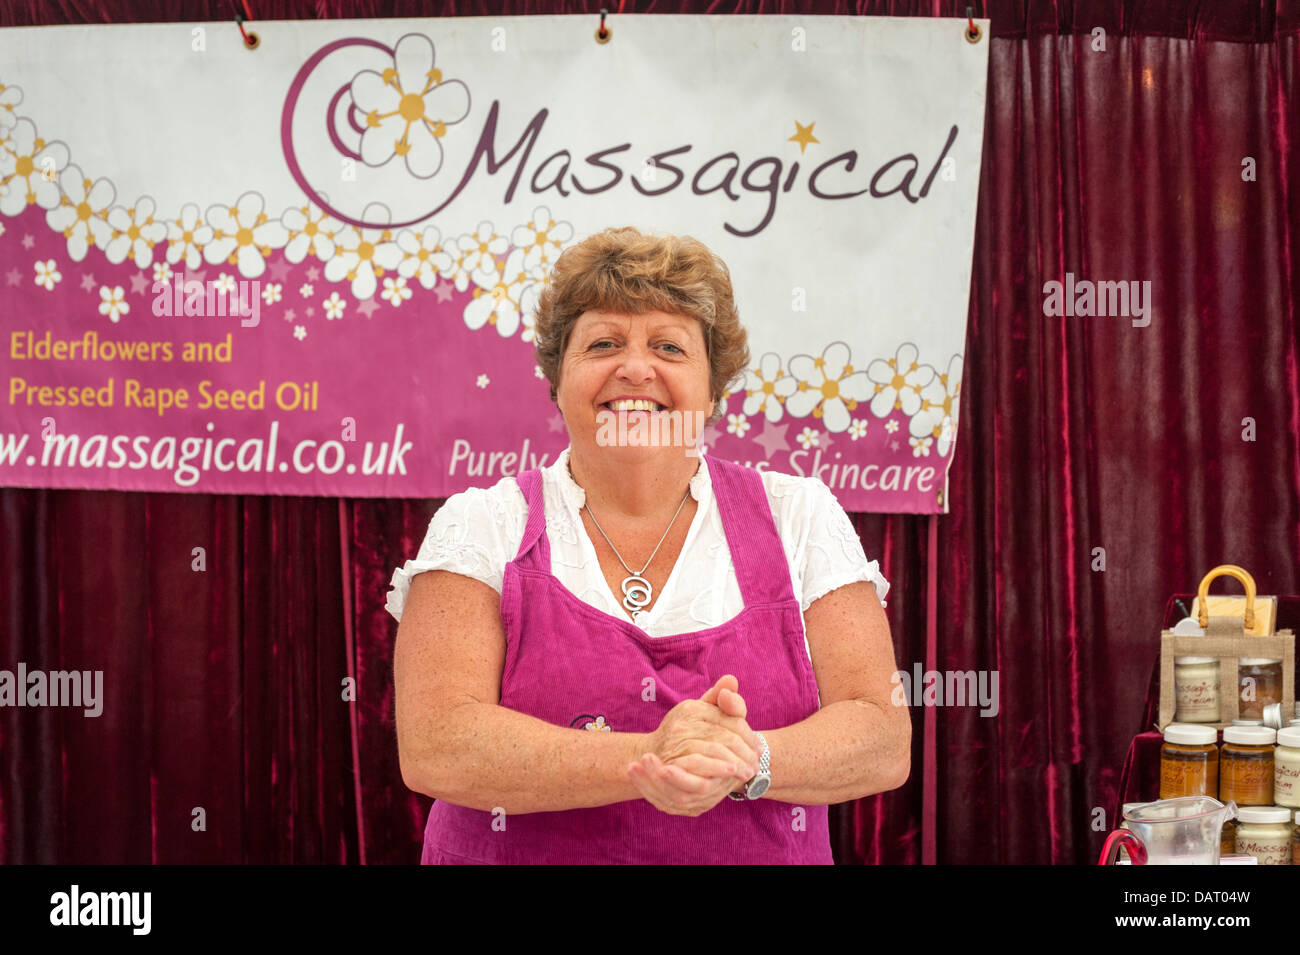 The stallholder at the Massagical massage products stall at Blenheim Palace Flower Show UK Stock Photo